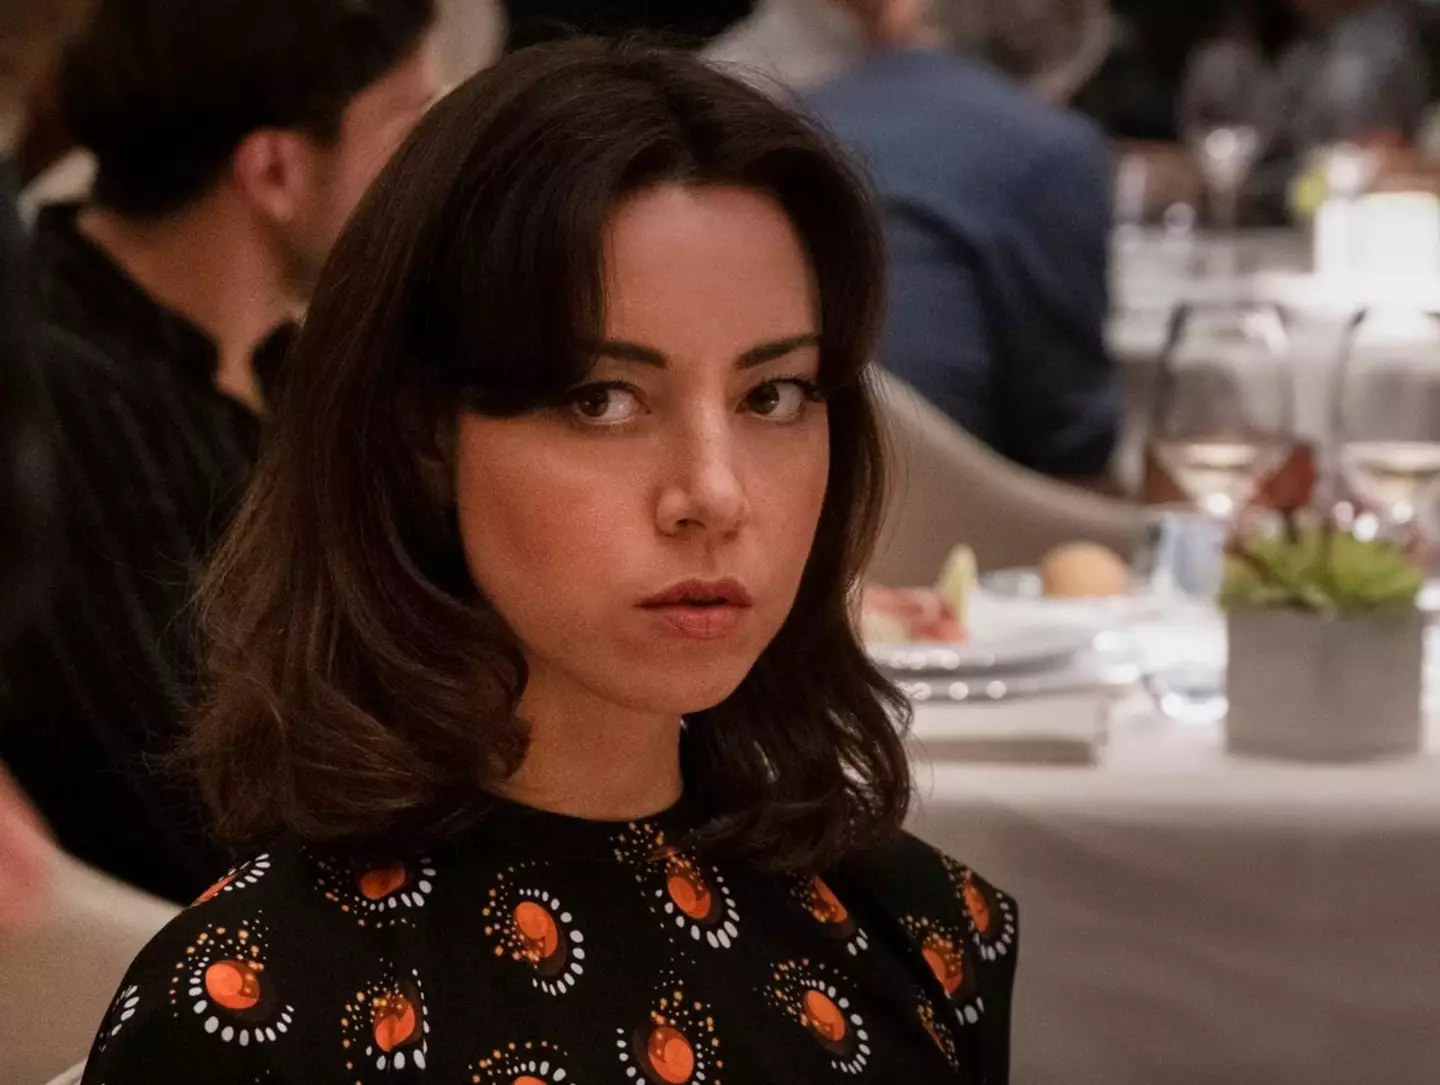 Aubrey Plaza suffered a terrifying stroke when she was just 20 years old.